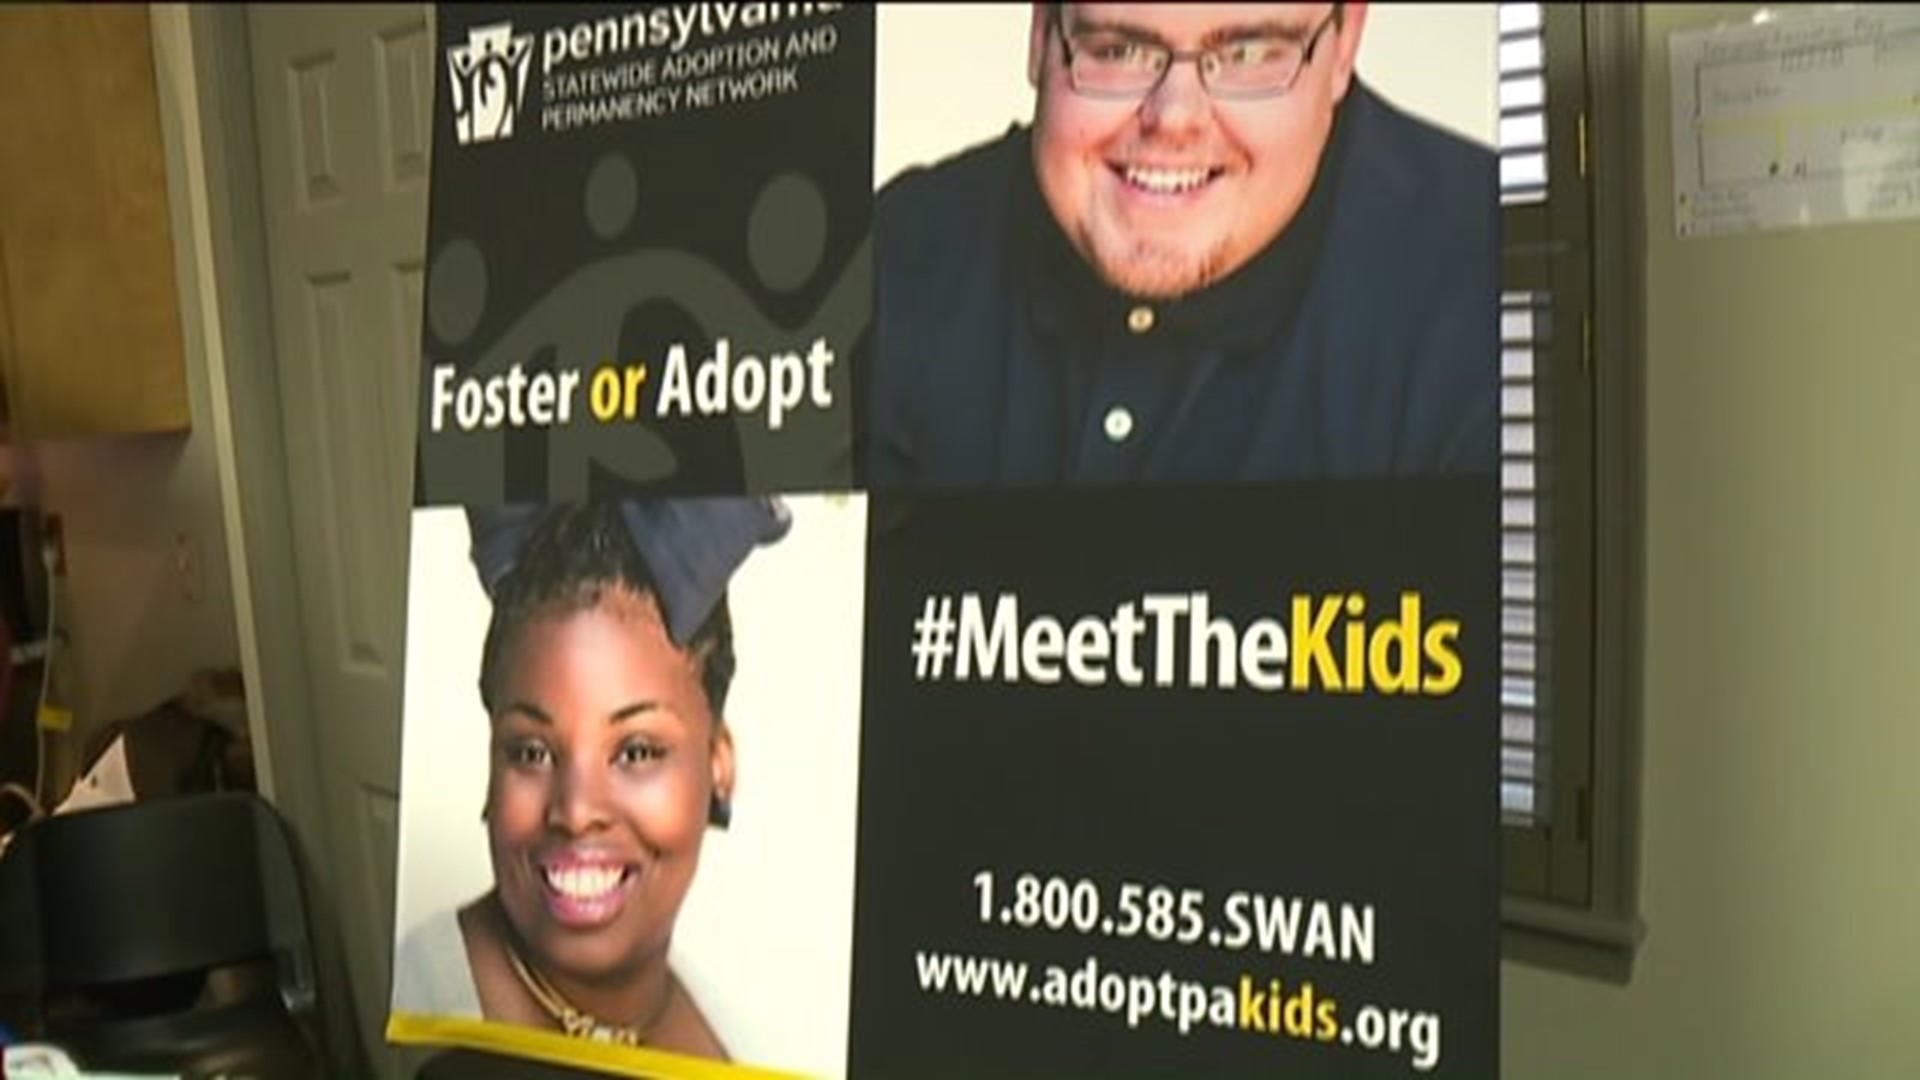 Adoption Match Event in Wilkes-Barre